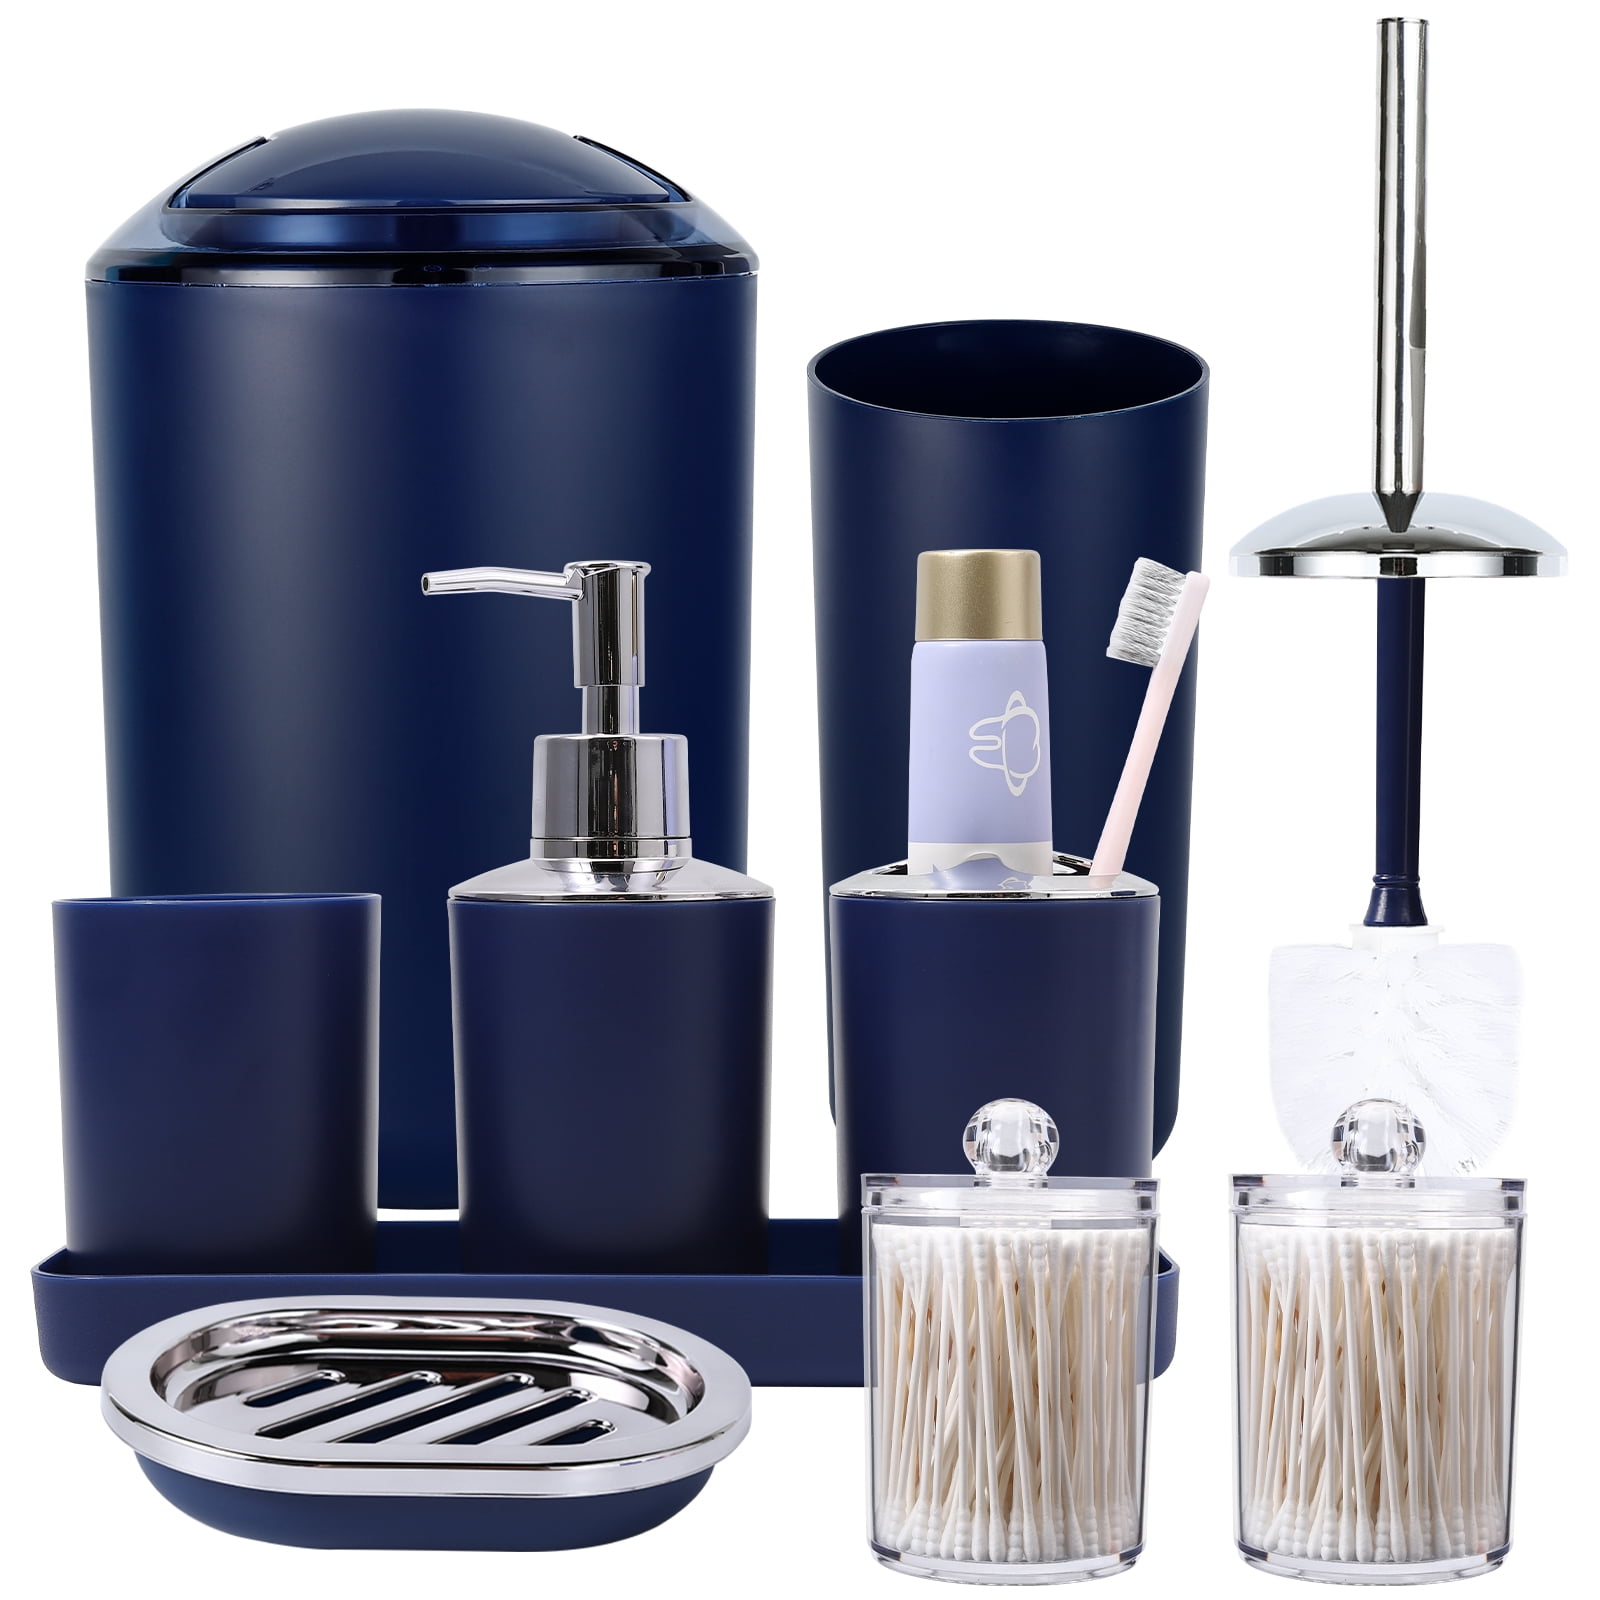 iMucci Soap Dispenser and Toothbrush Holder Lotion Bottle Modern Home Navy  Blue Bathroom Accessories Set of 5 Wash Kit